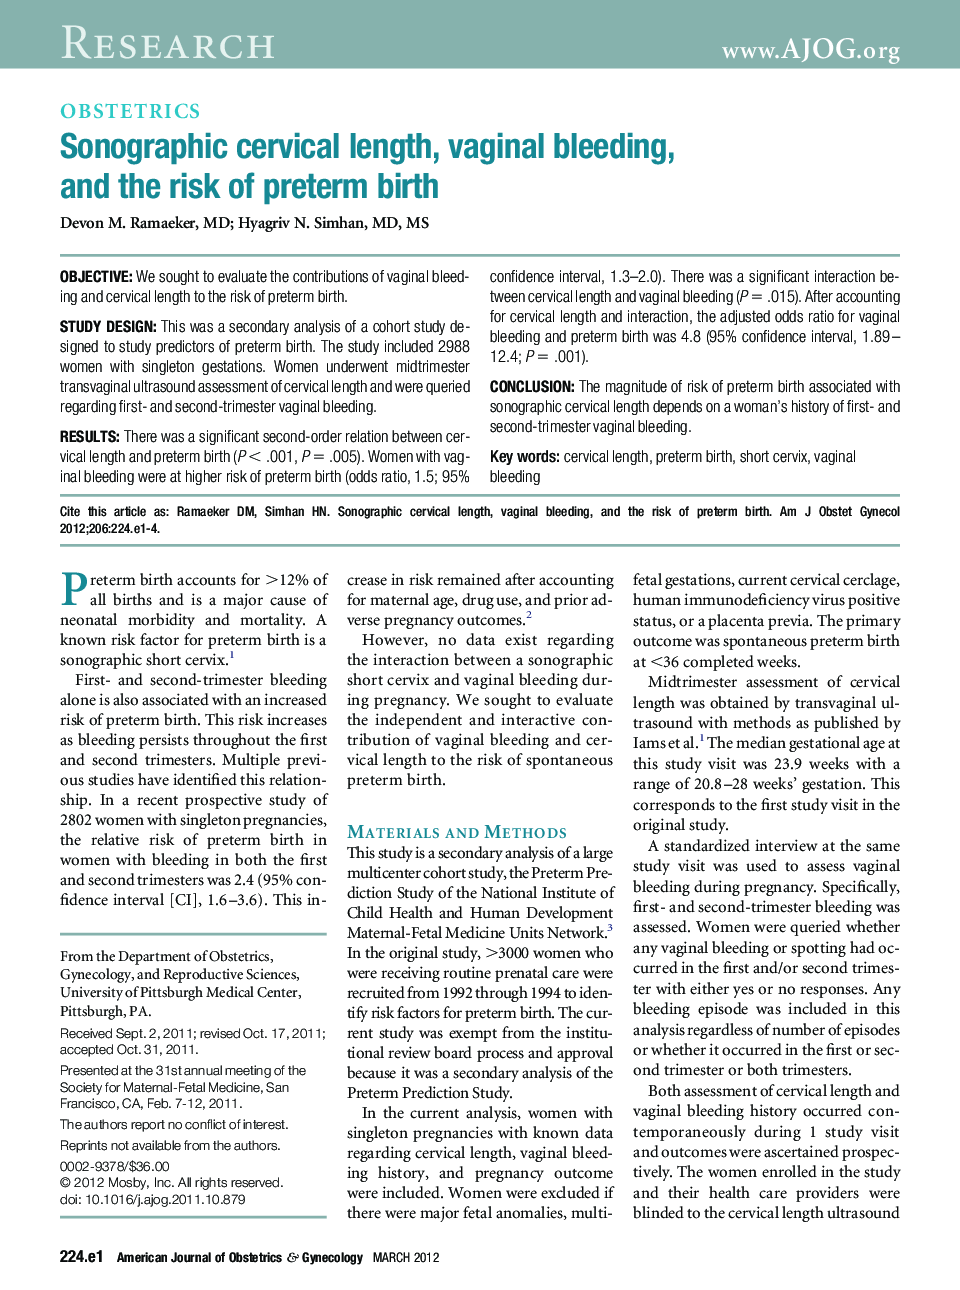 Sonographic cervical length, vaginal bleeding, and the risk of preterm birth